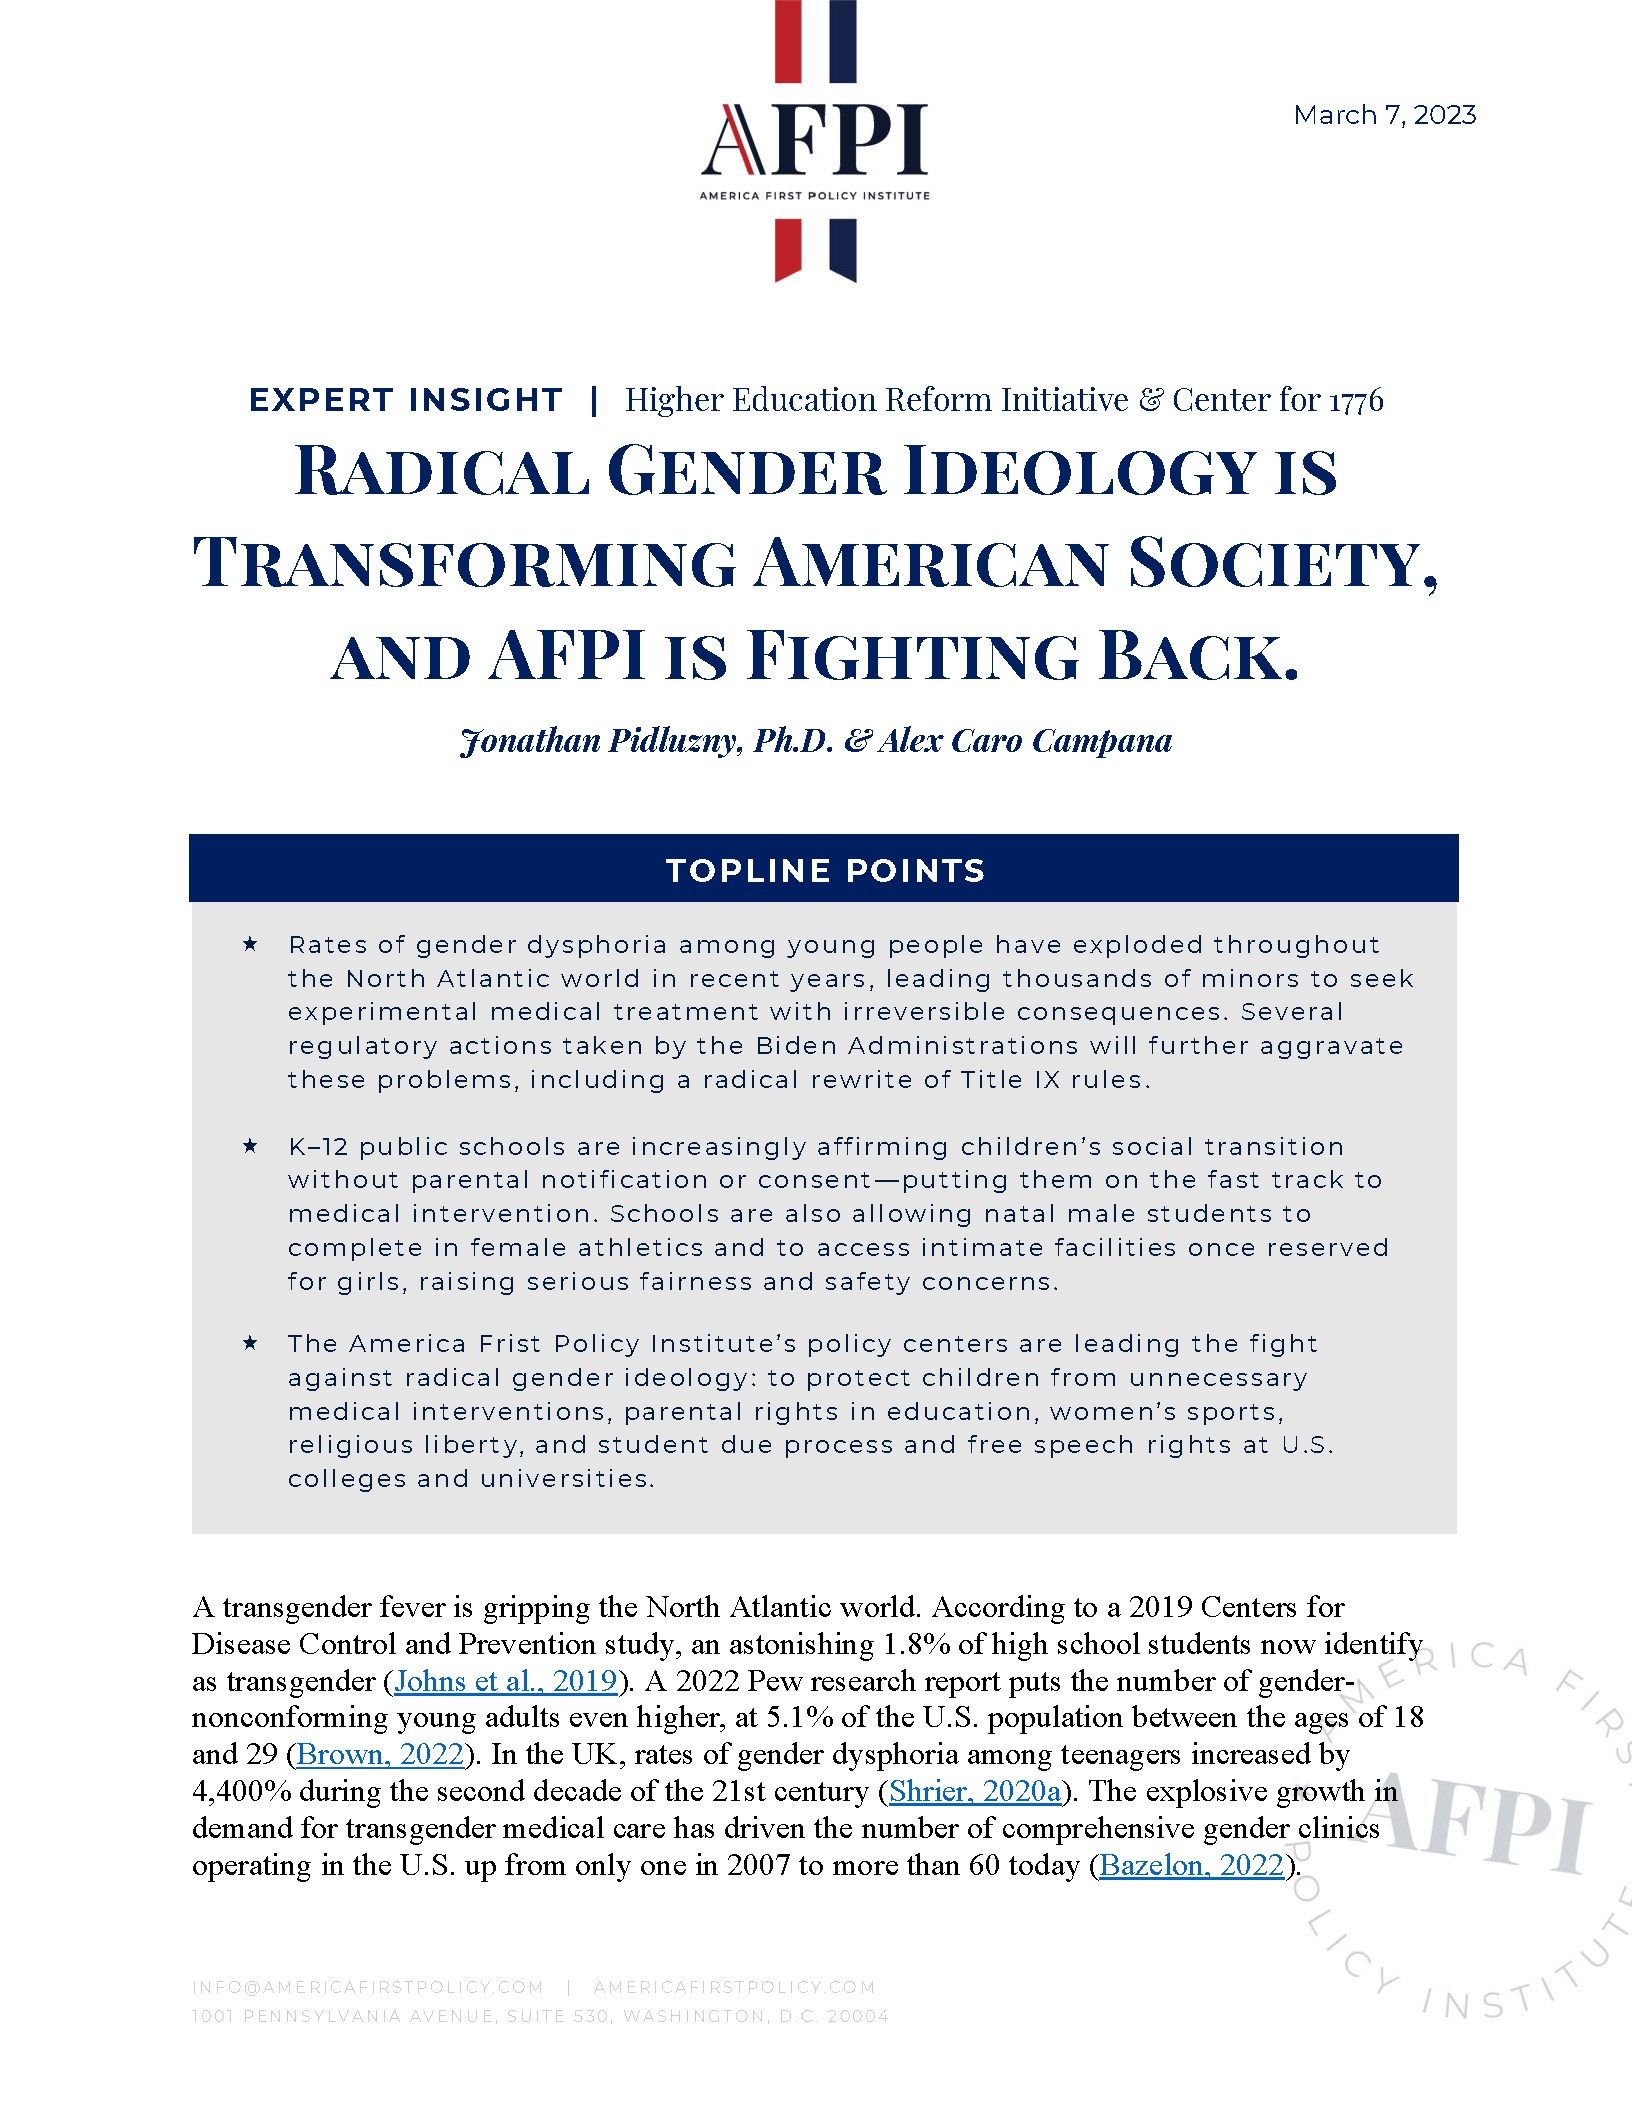 Radical Gender Ideology Is Transforming American Society And Afpi Is Fighting Back Issues